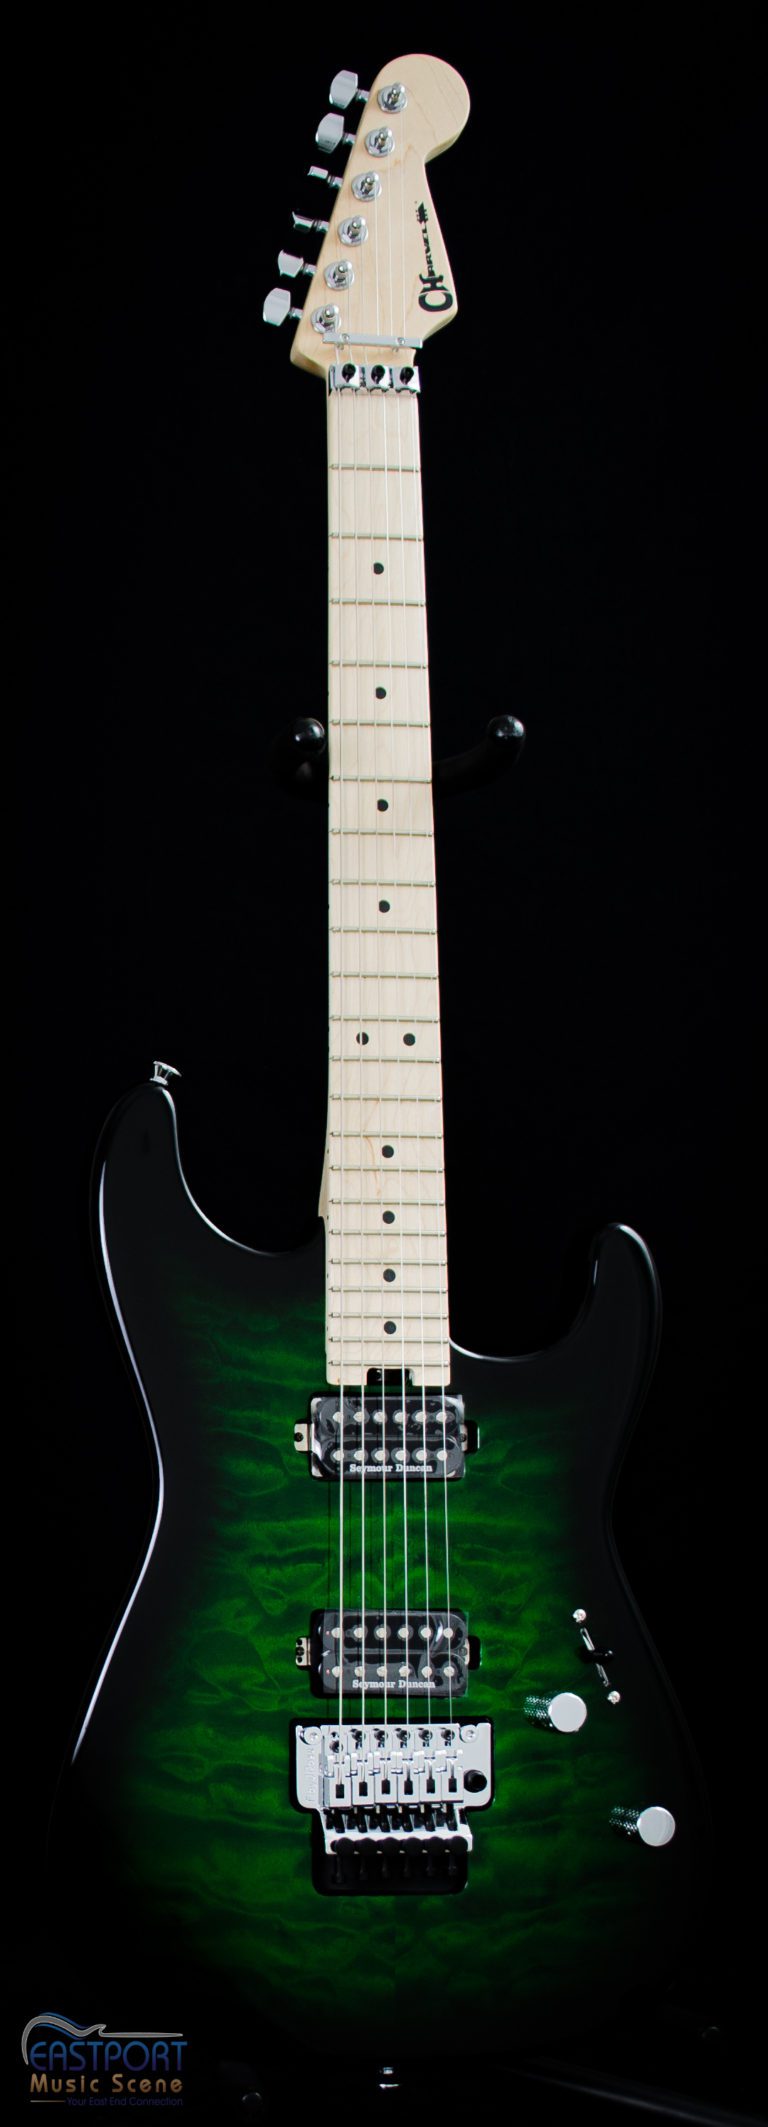 A green and black electric guitar with white strings.